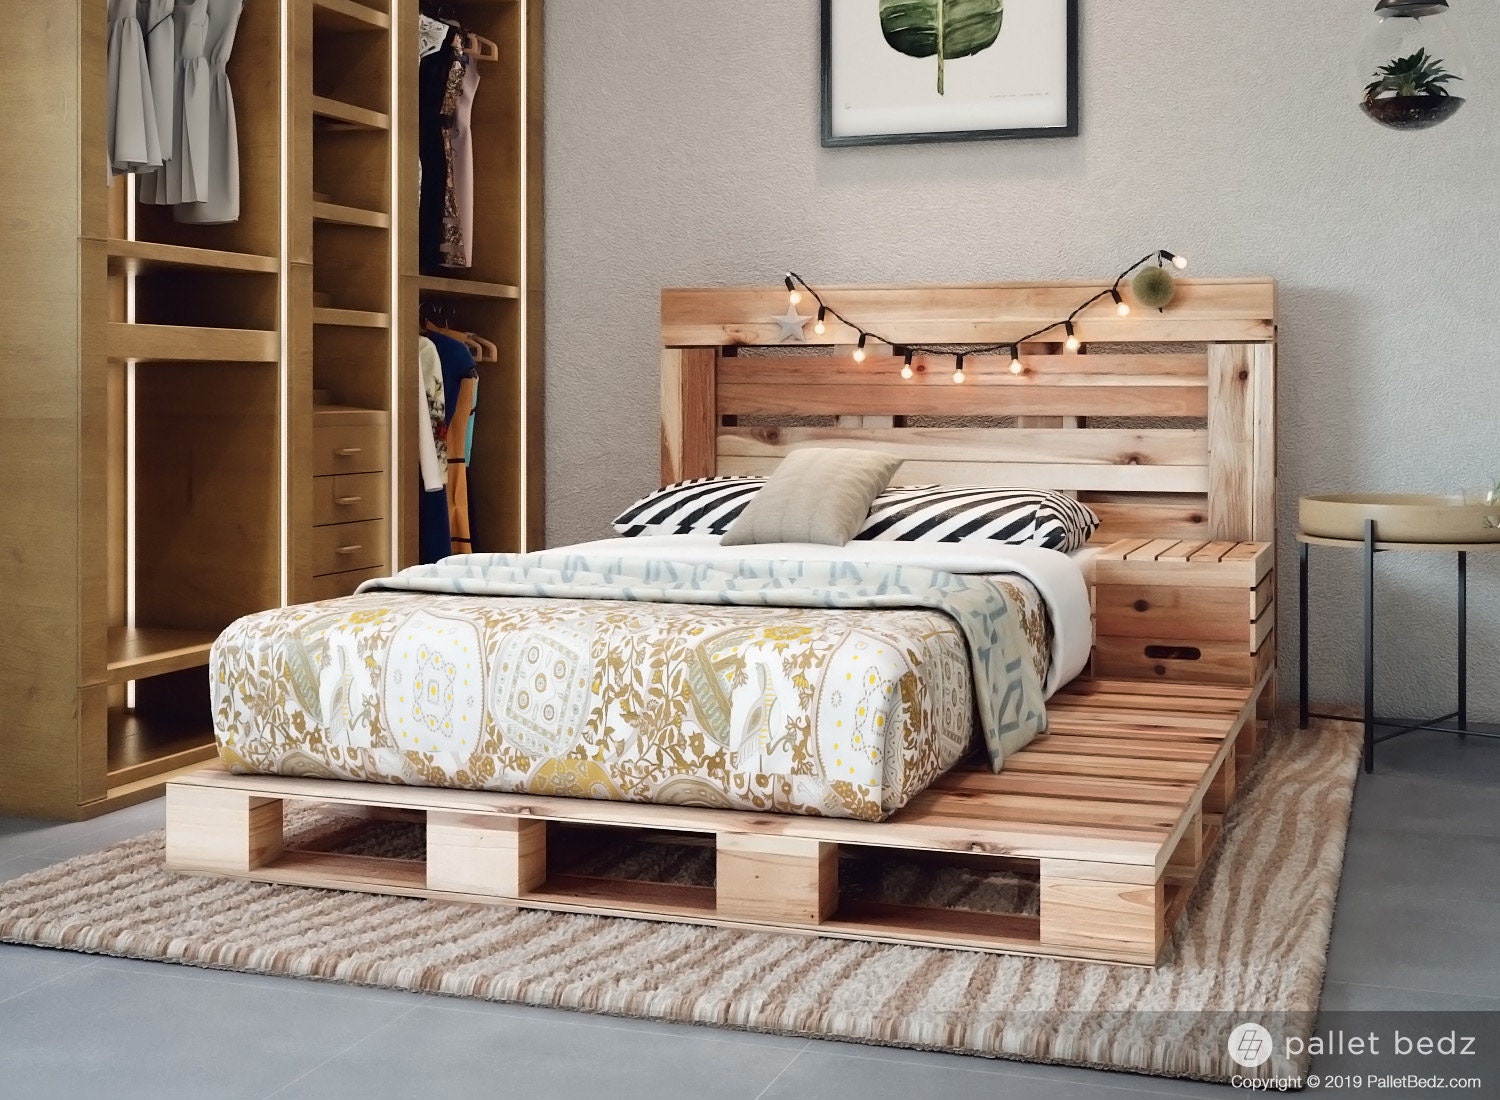 Pallet Bed The Twin Size Includes, King Size Bed Frame Made Out Of Pallets